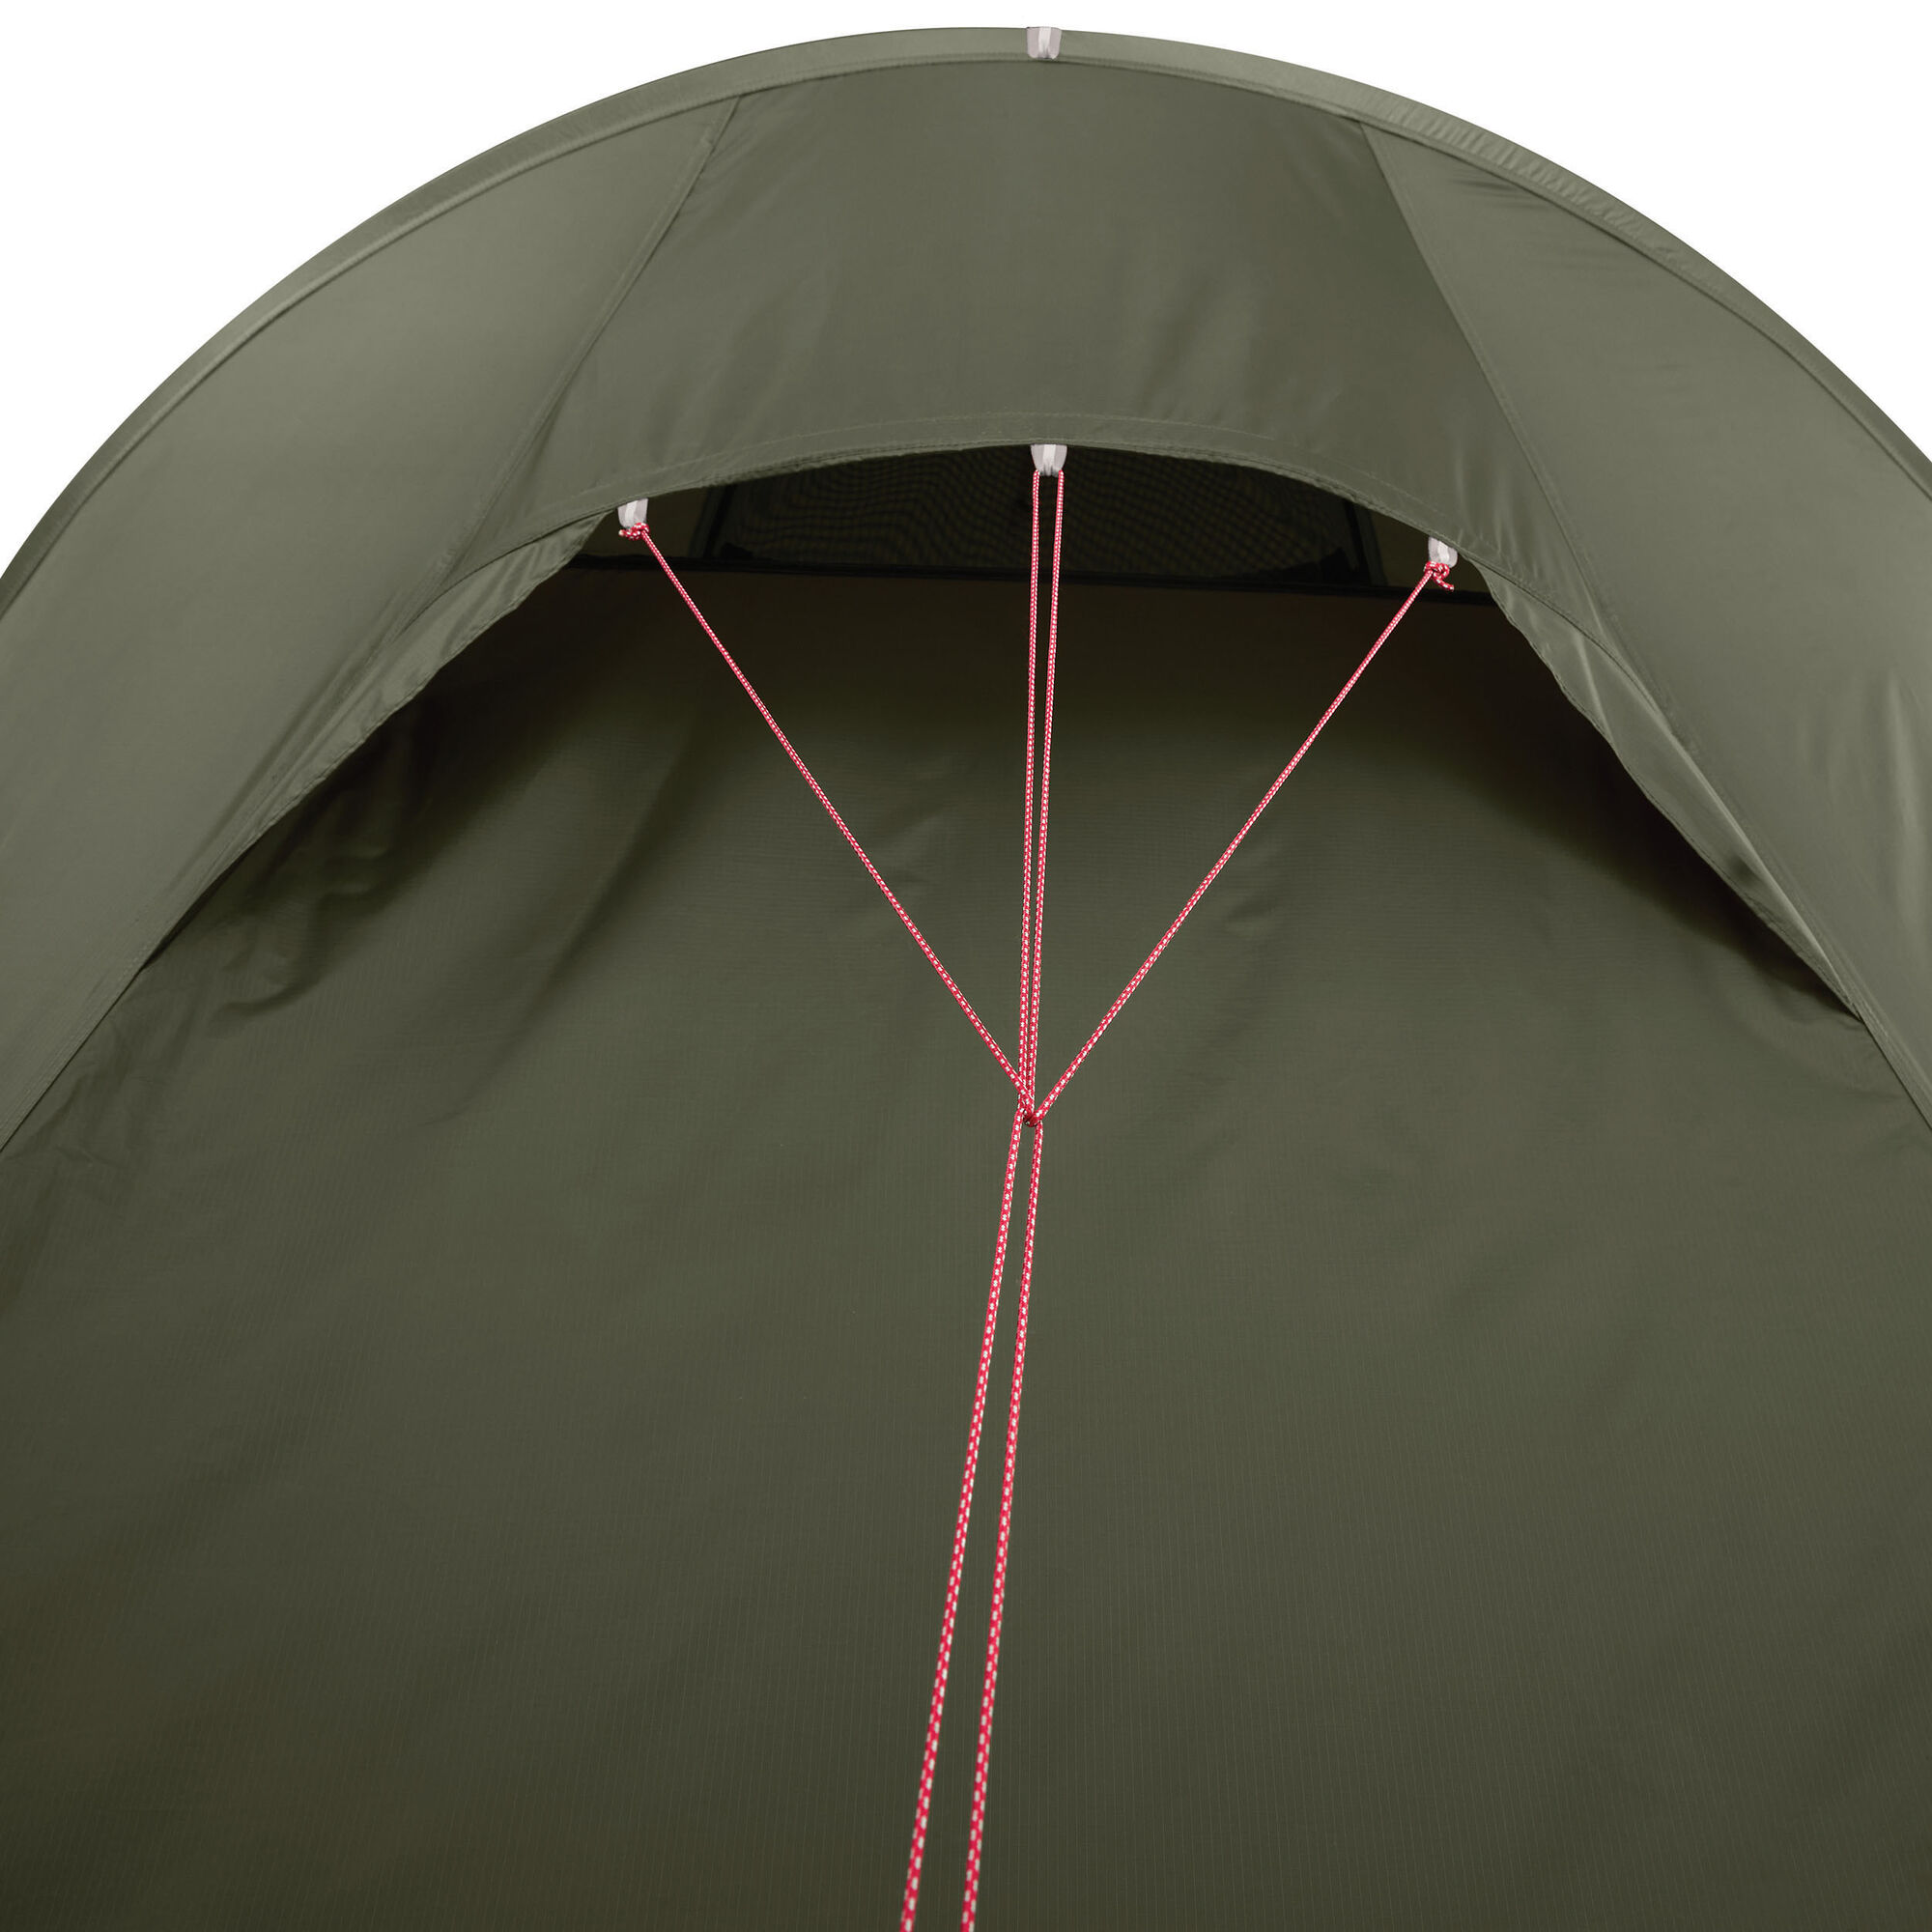 MSR Tindheim 2 Backpacking Tunnel Tent with Footprint